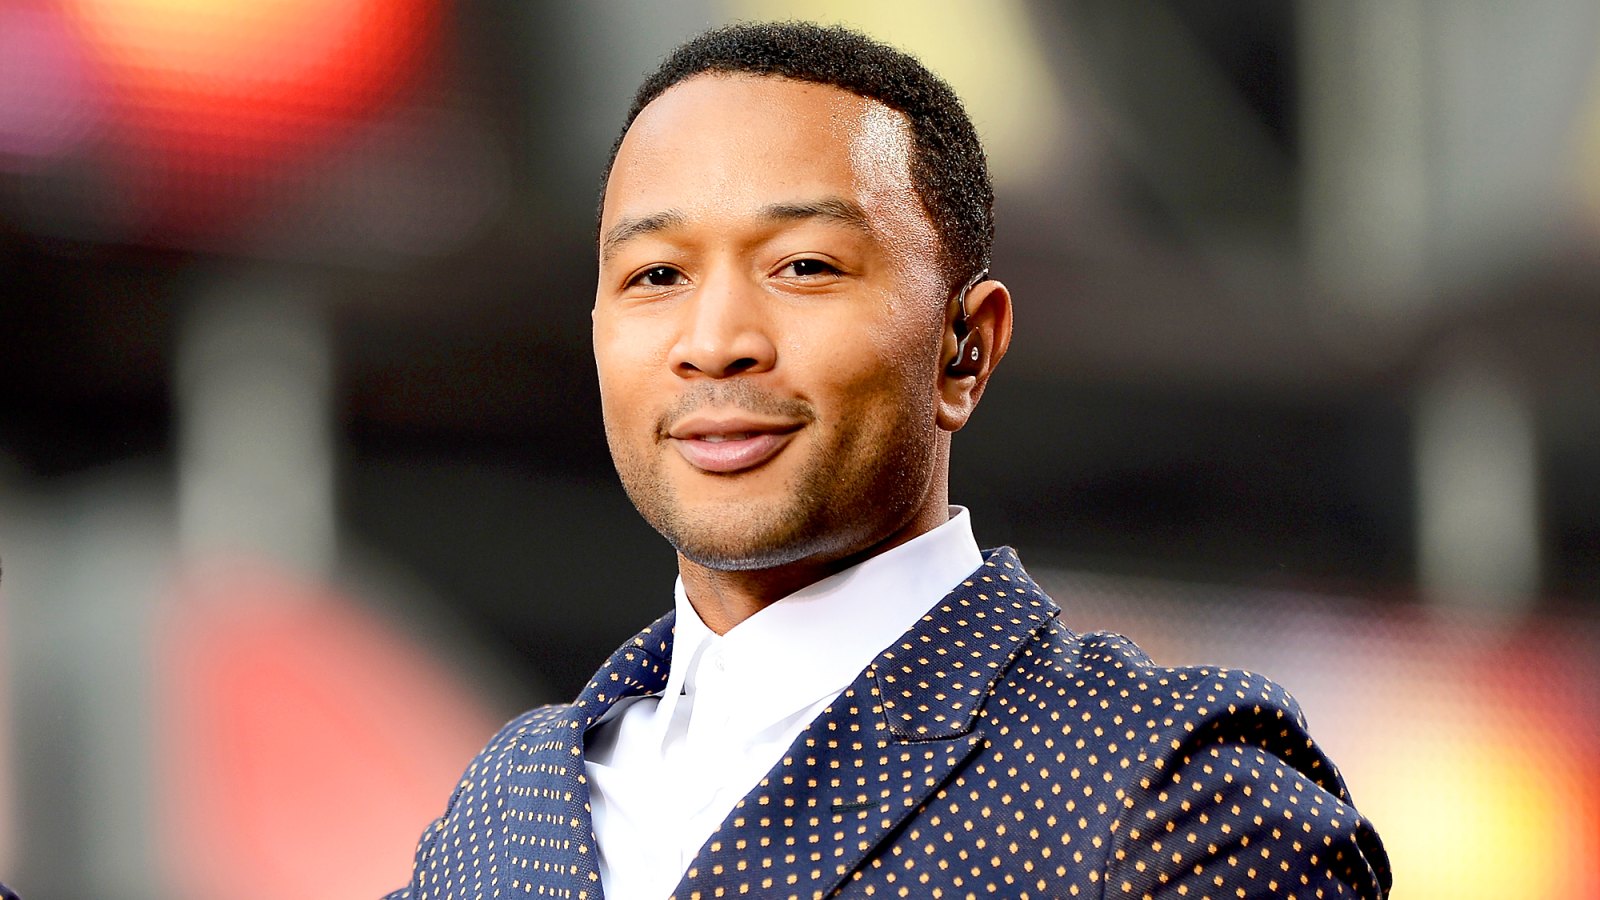 John Legend performs on stage at the "Chime For Change: The Sound Of Change Live" Concert at Twickenham Stadium in London, England.